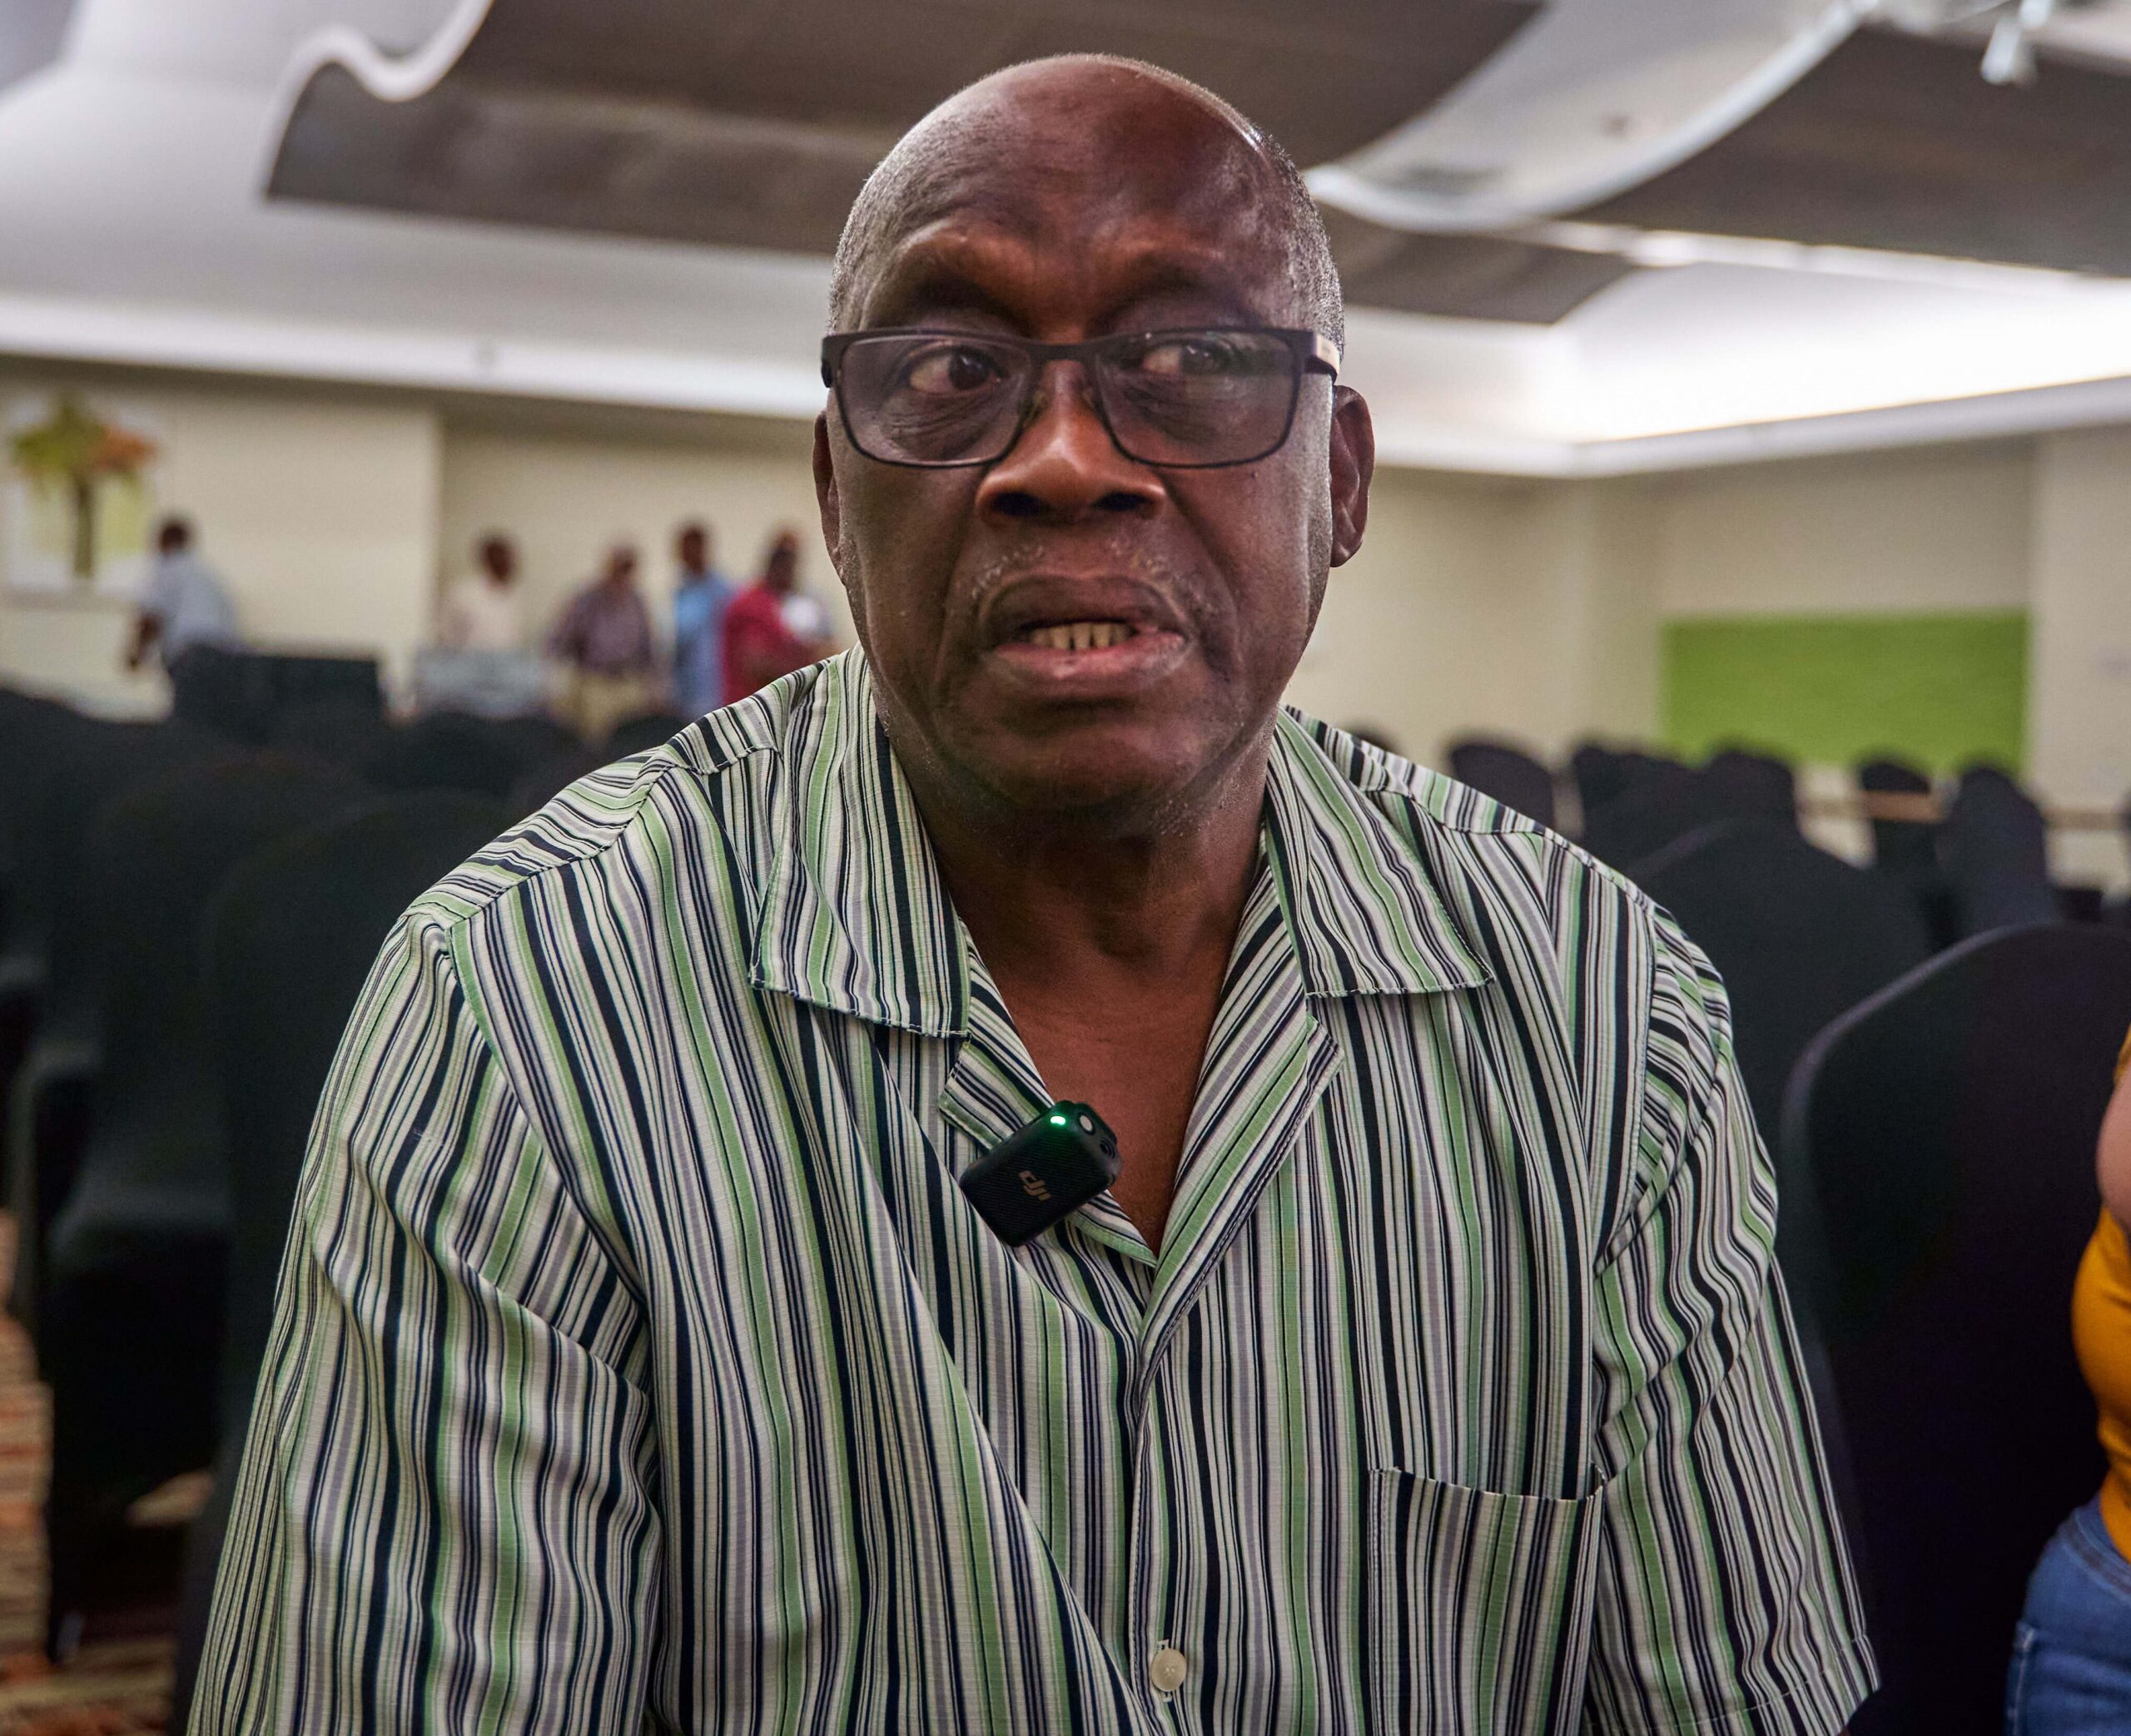 Poultry Farmers in Barbados Face Financial Challenges Due to Unfair Pricing Practices: Barbados Agricultural Society CEO Raises Concerns